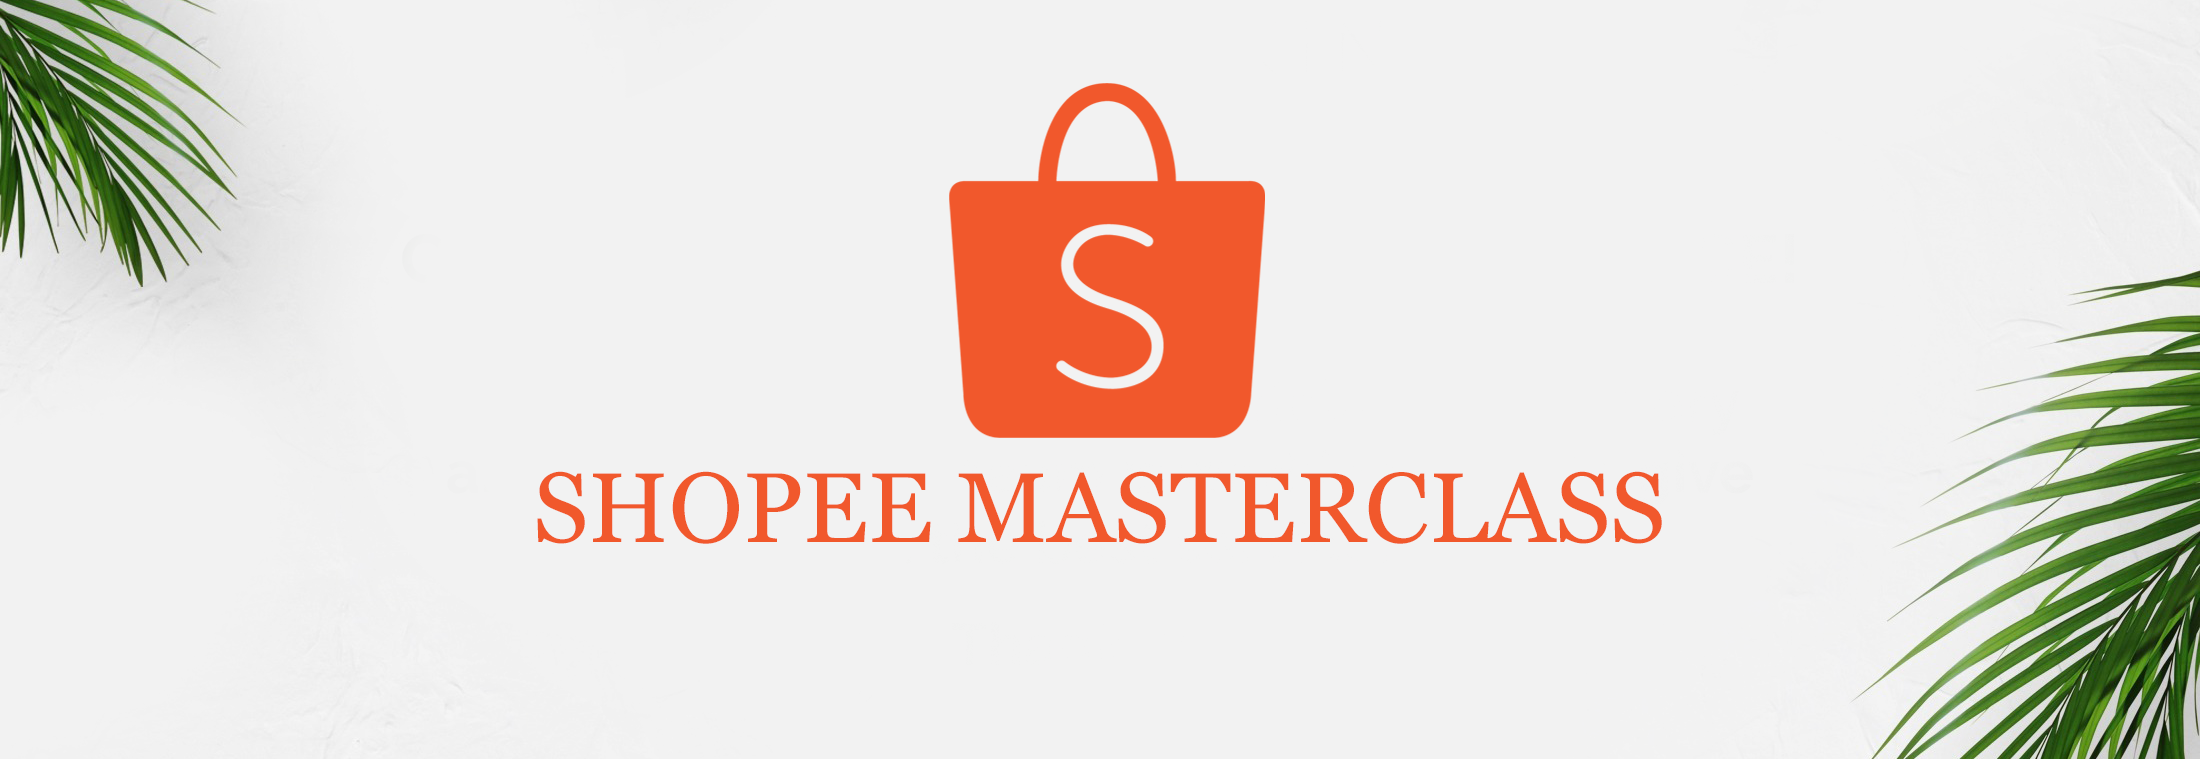 This Step-by-Step Masterclass Will Show You How To Start Shopee and Skyrocket your Sales